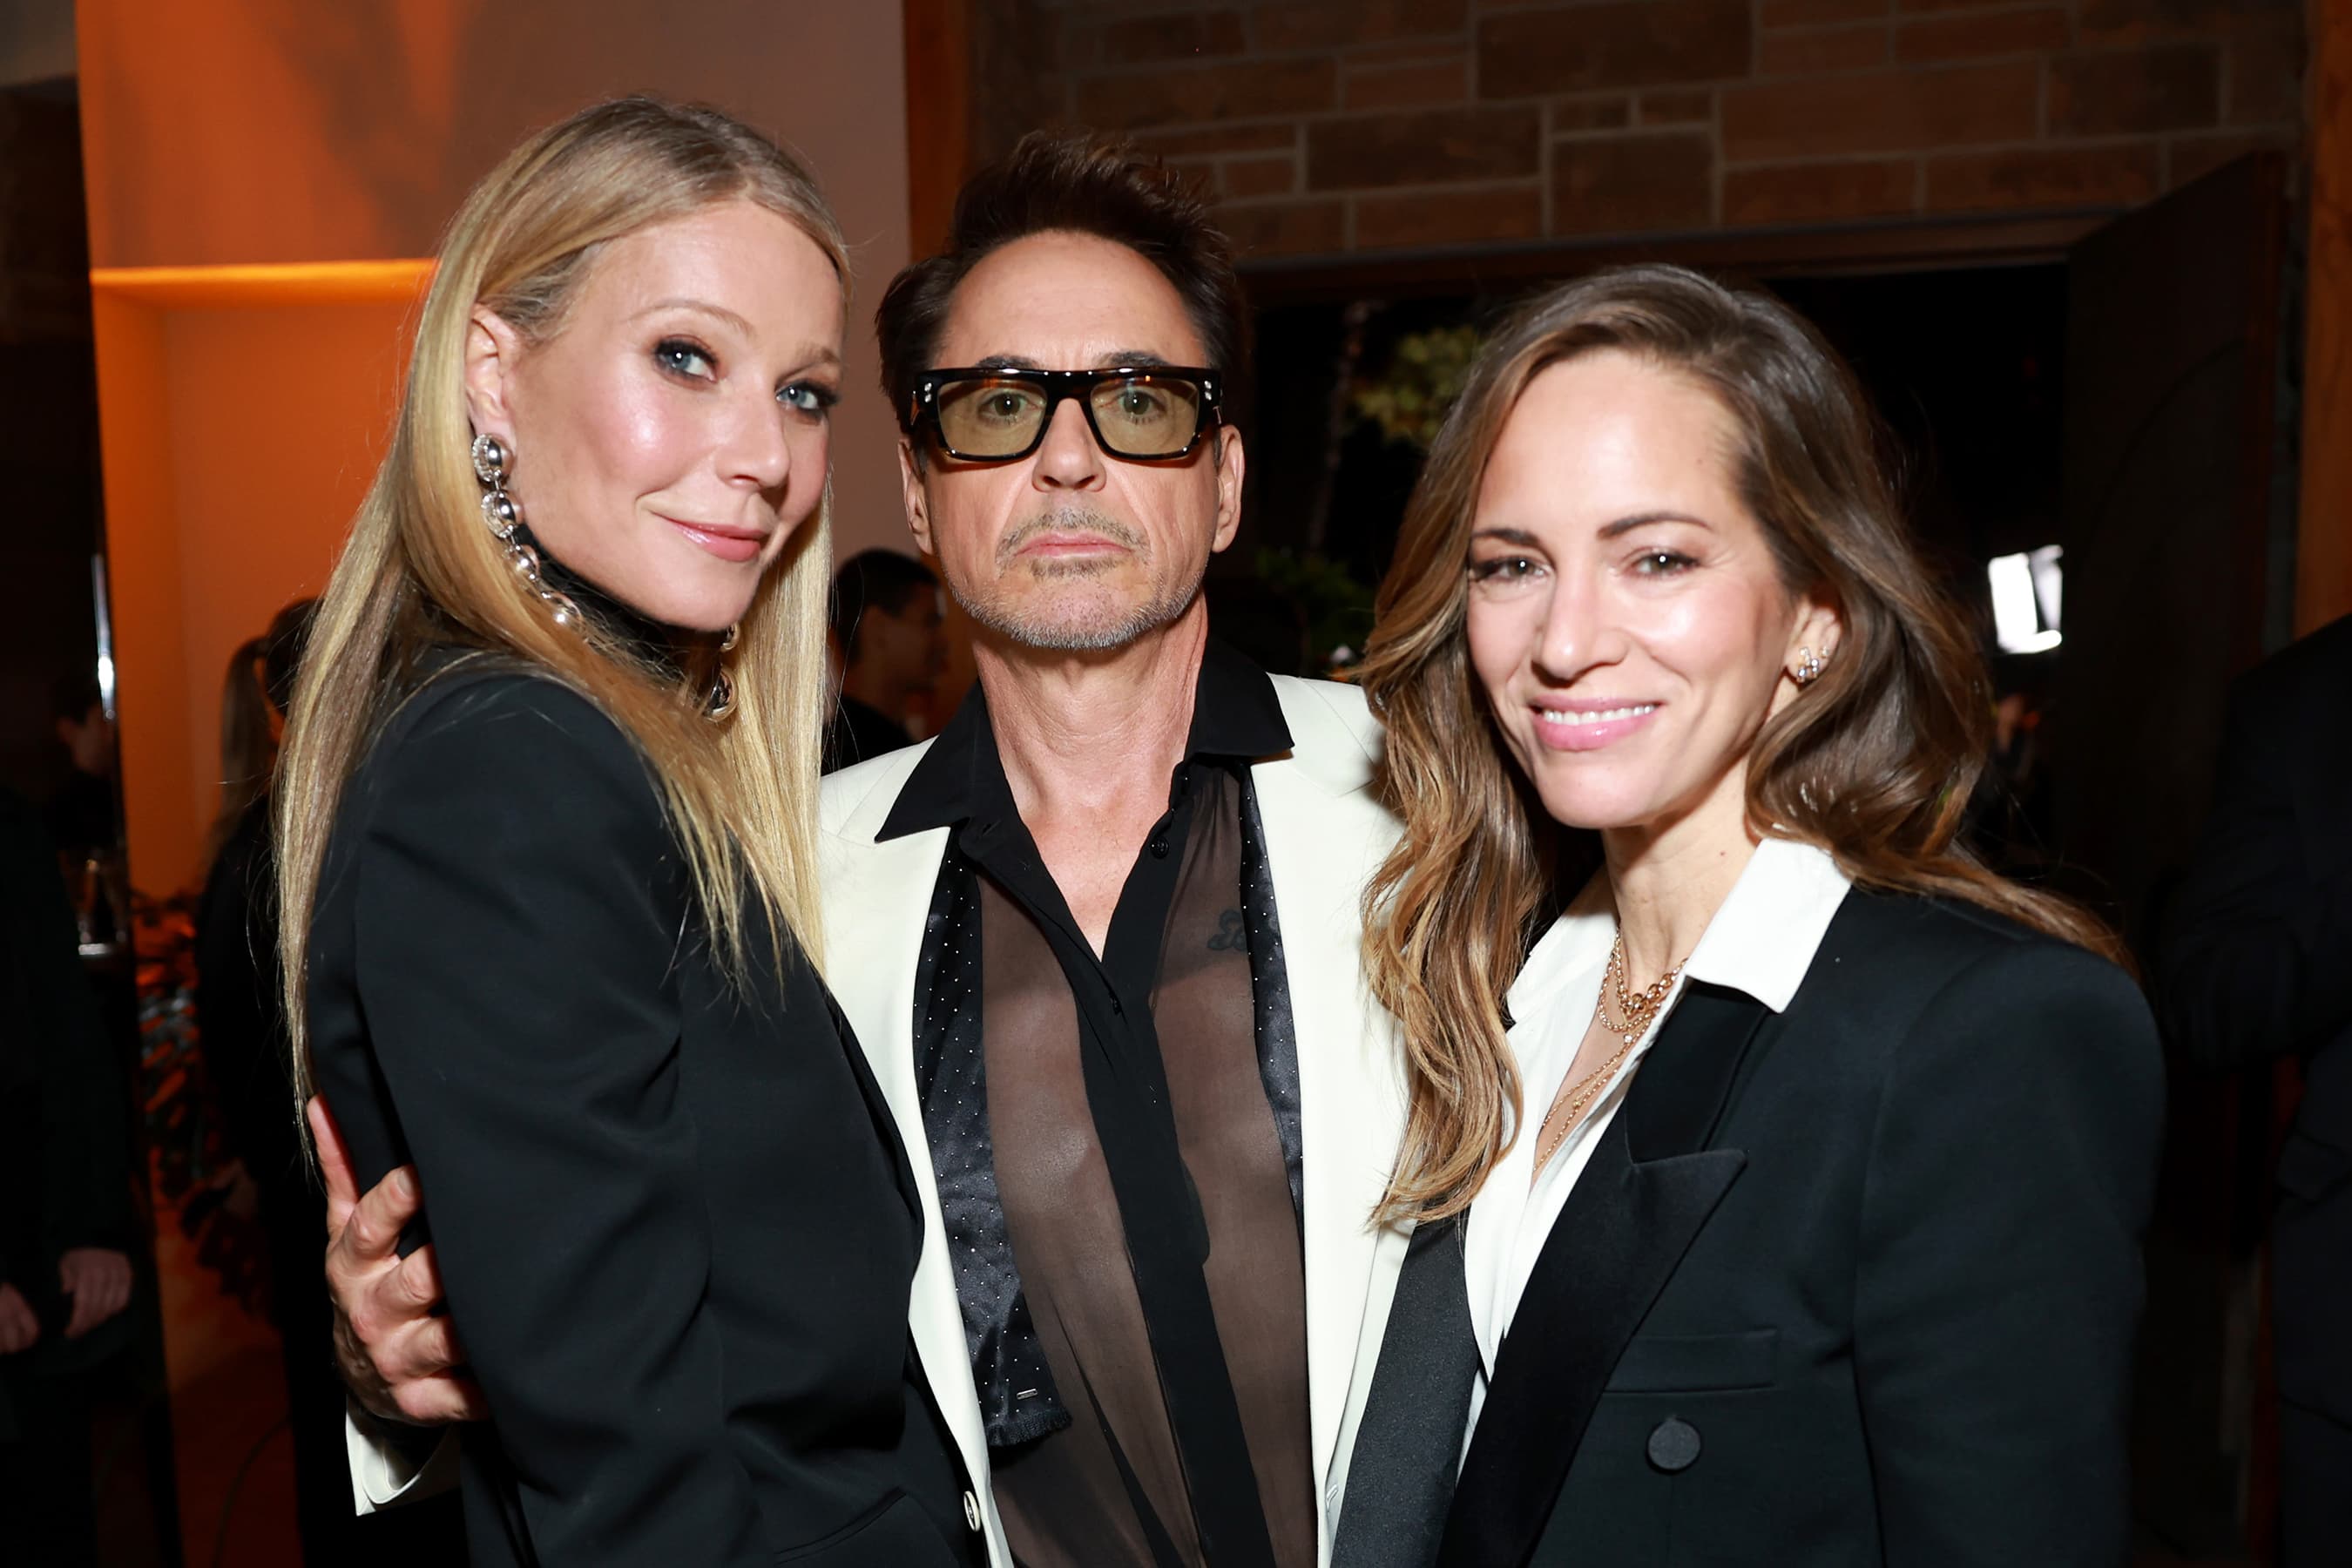 Saint Laurent x Vanity Fair x NBCUniversal party photo to celebrate Oppenheimer 